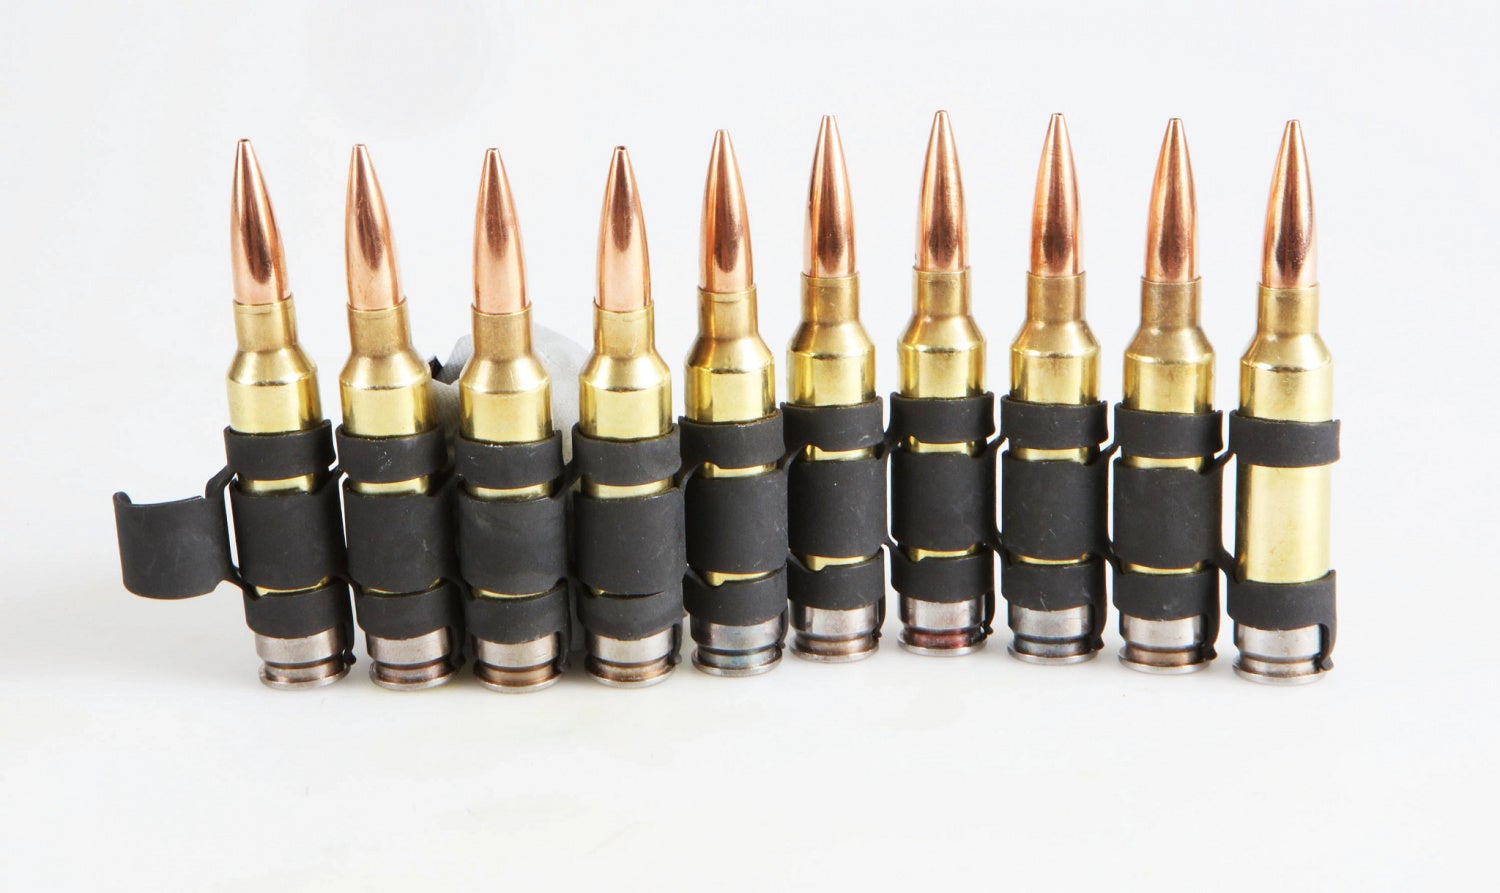 Winchester Awarded NGSW Ammunition Manufacturing Facility Design Contract